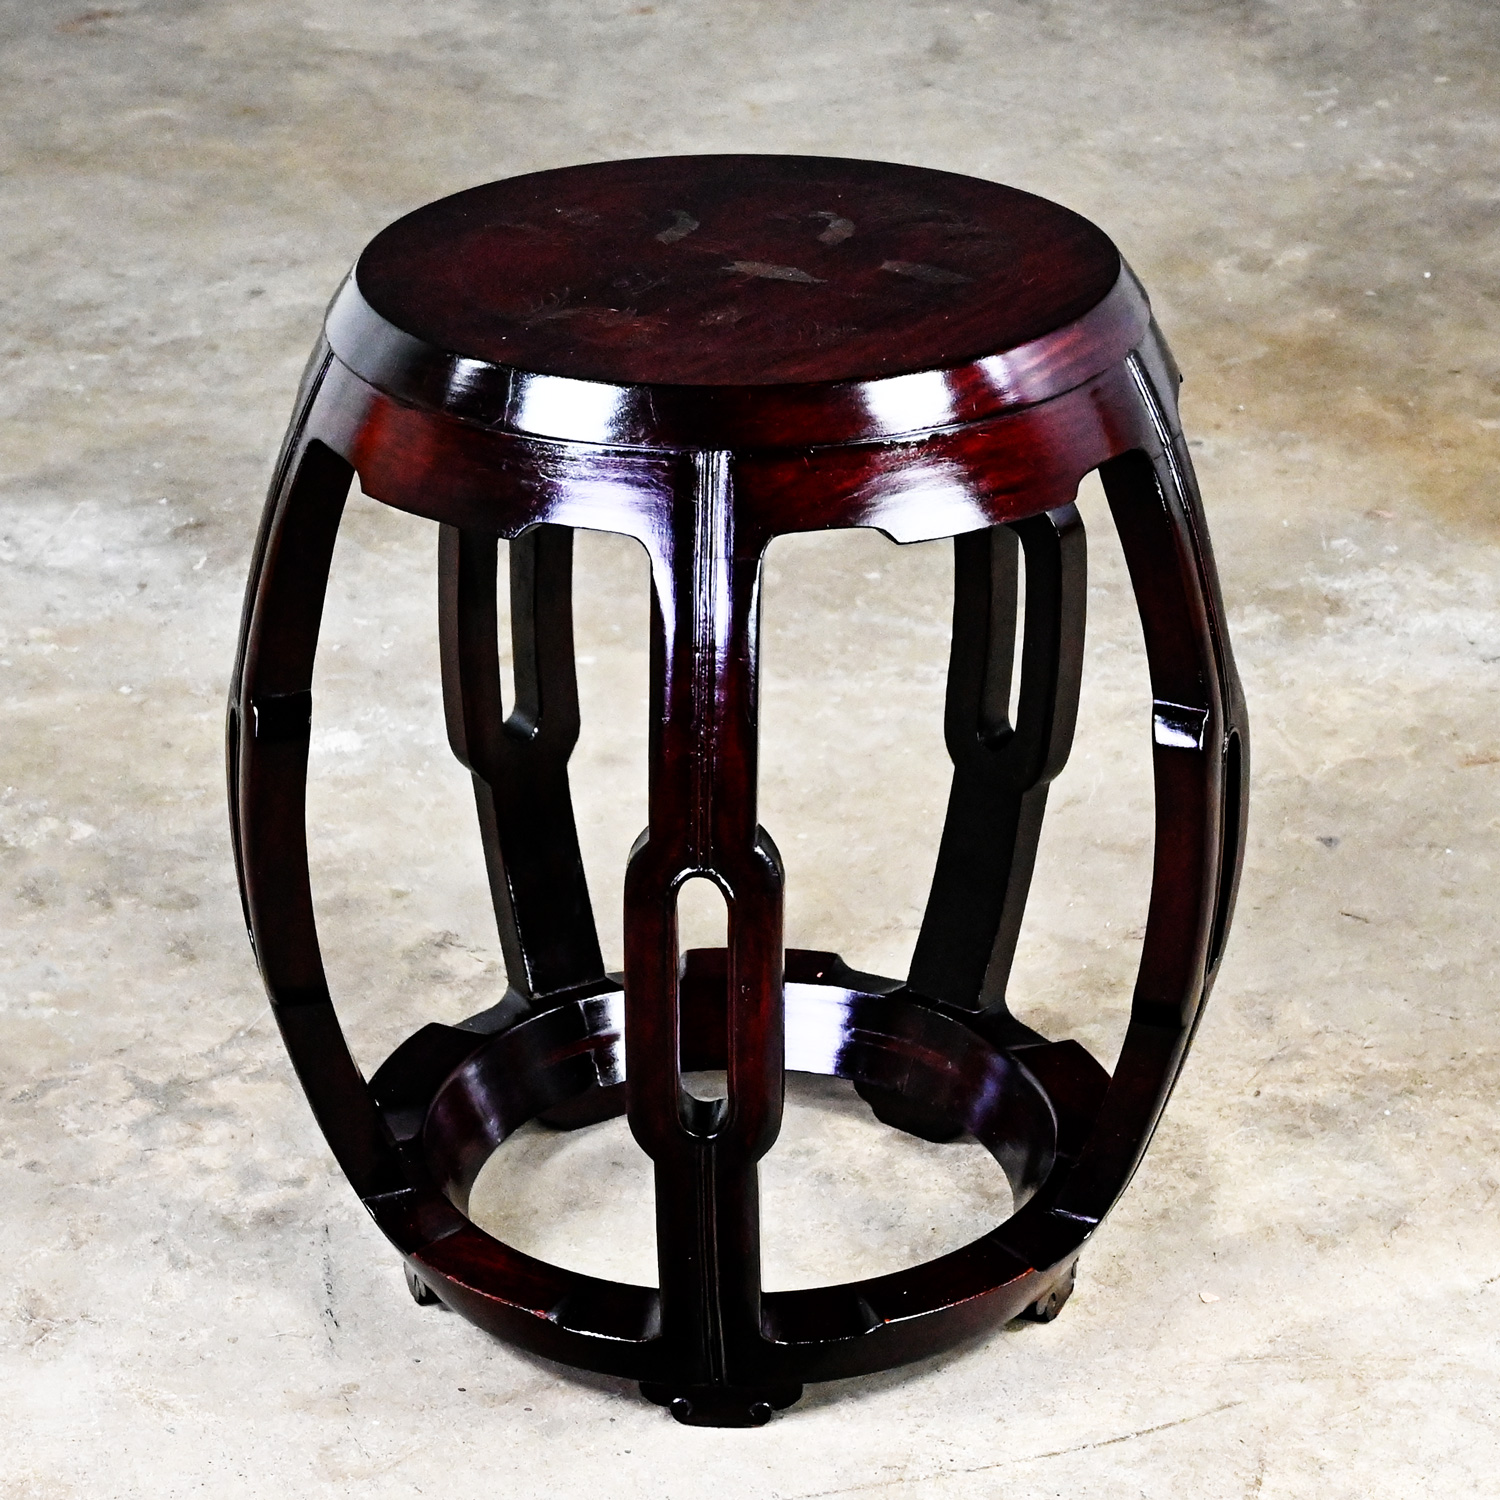 Mid 20th Century Chinoiserie Asian Rosewood Barrel Drum Table or Garden Stool with Brass Inlaid Design